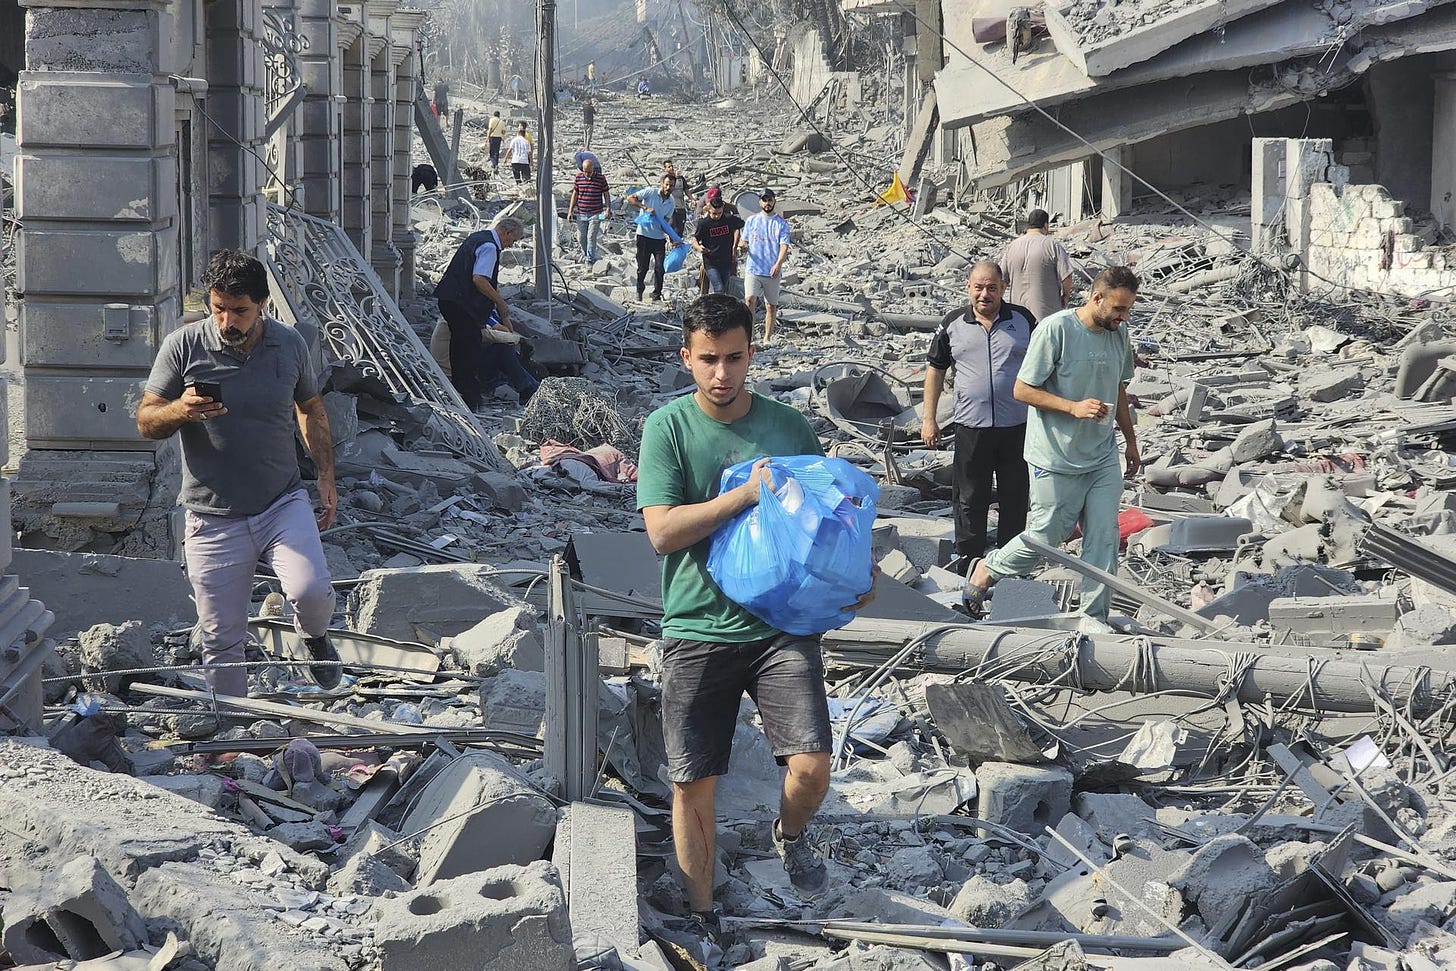 Palestinians walk through the rubble of buildings destroyed by Israeli airstrikes in Gaza City.